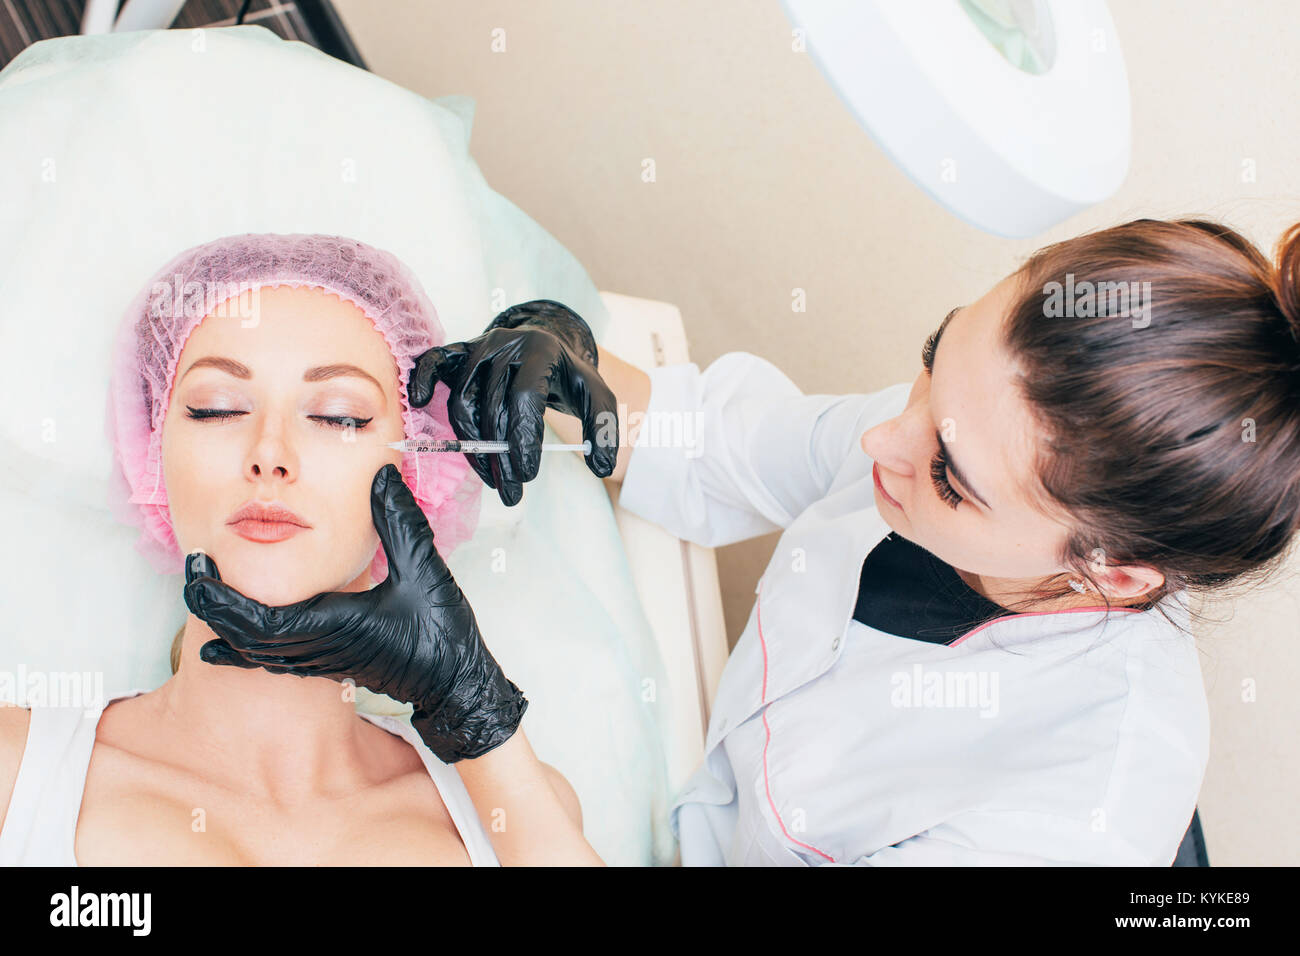 Cosmetic Treatment. Closeup Beautician Hands Doing Facial Skin Lifting Injection To Woman's Face. Receiving Beauty Procedure Indoors. High Resolution Stock Photo